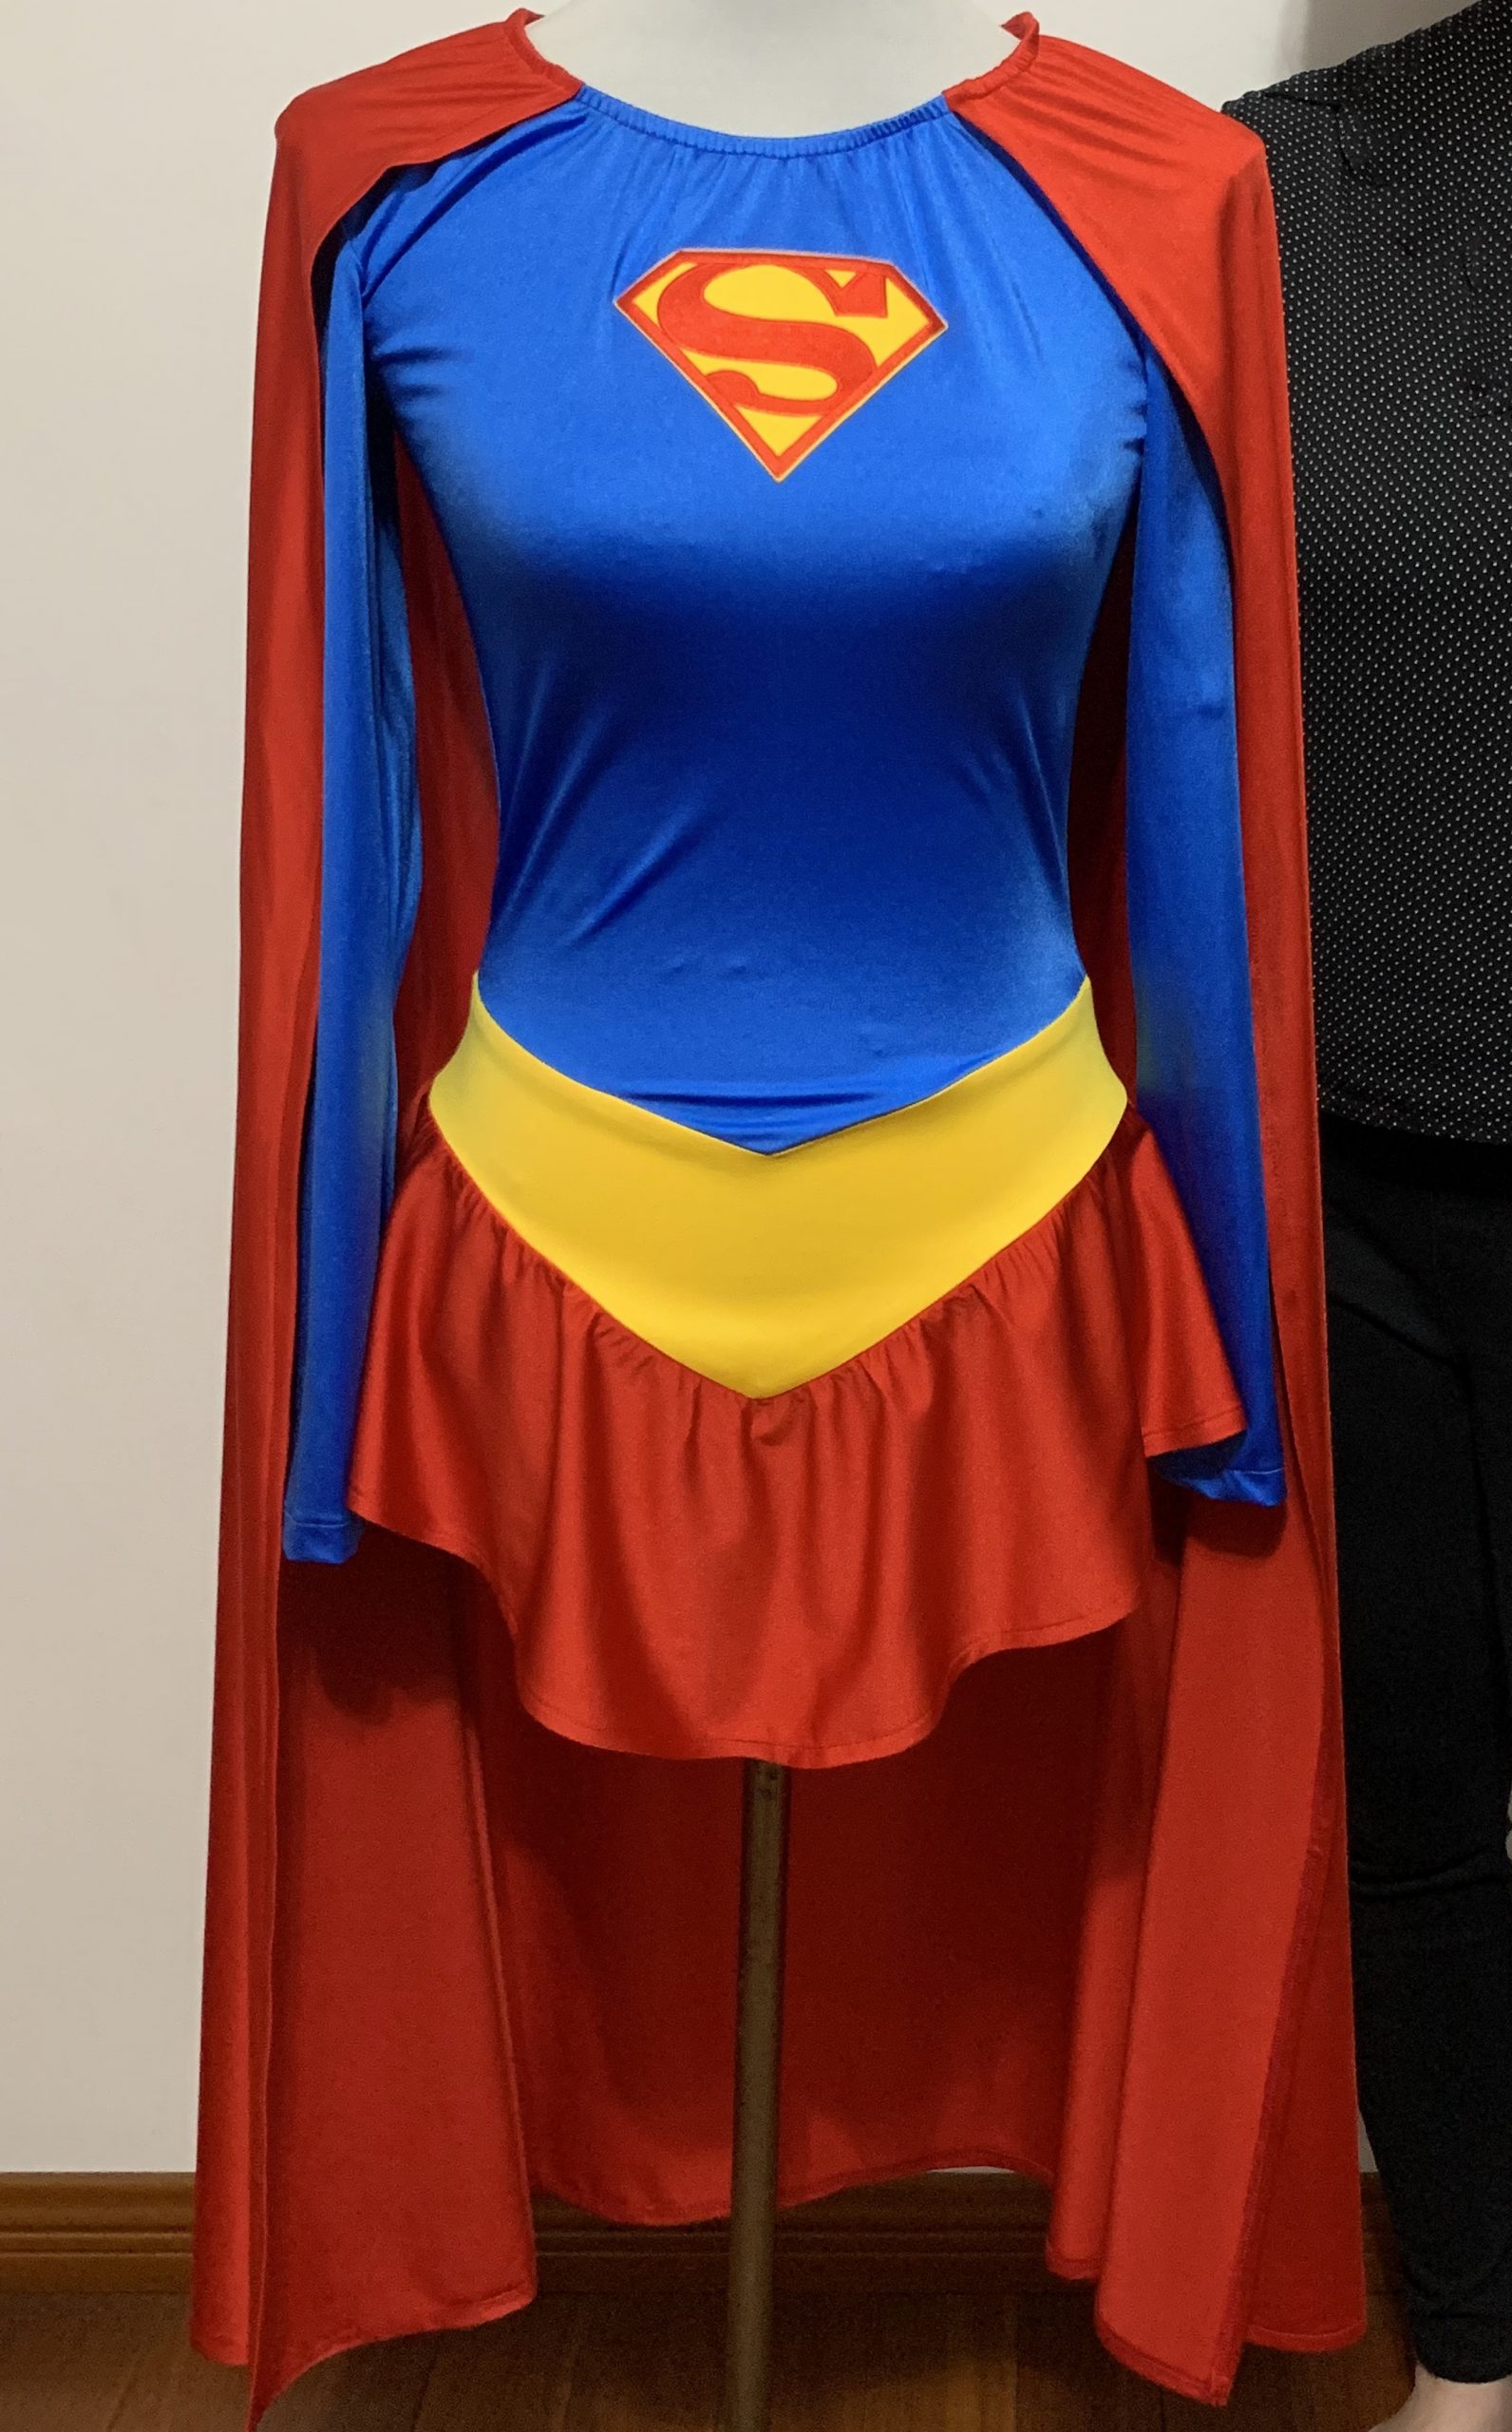 You are currently viewing Our new Supergirl Matrix battlesuit!